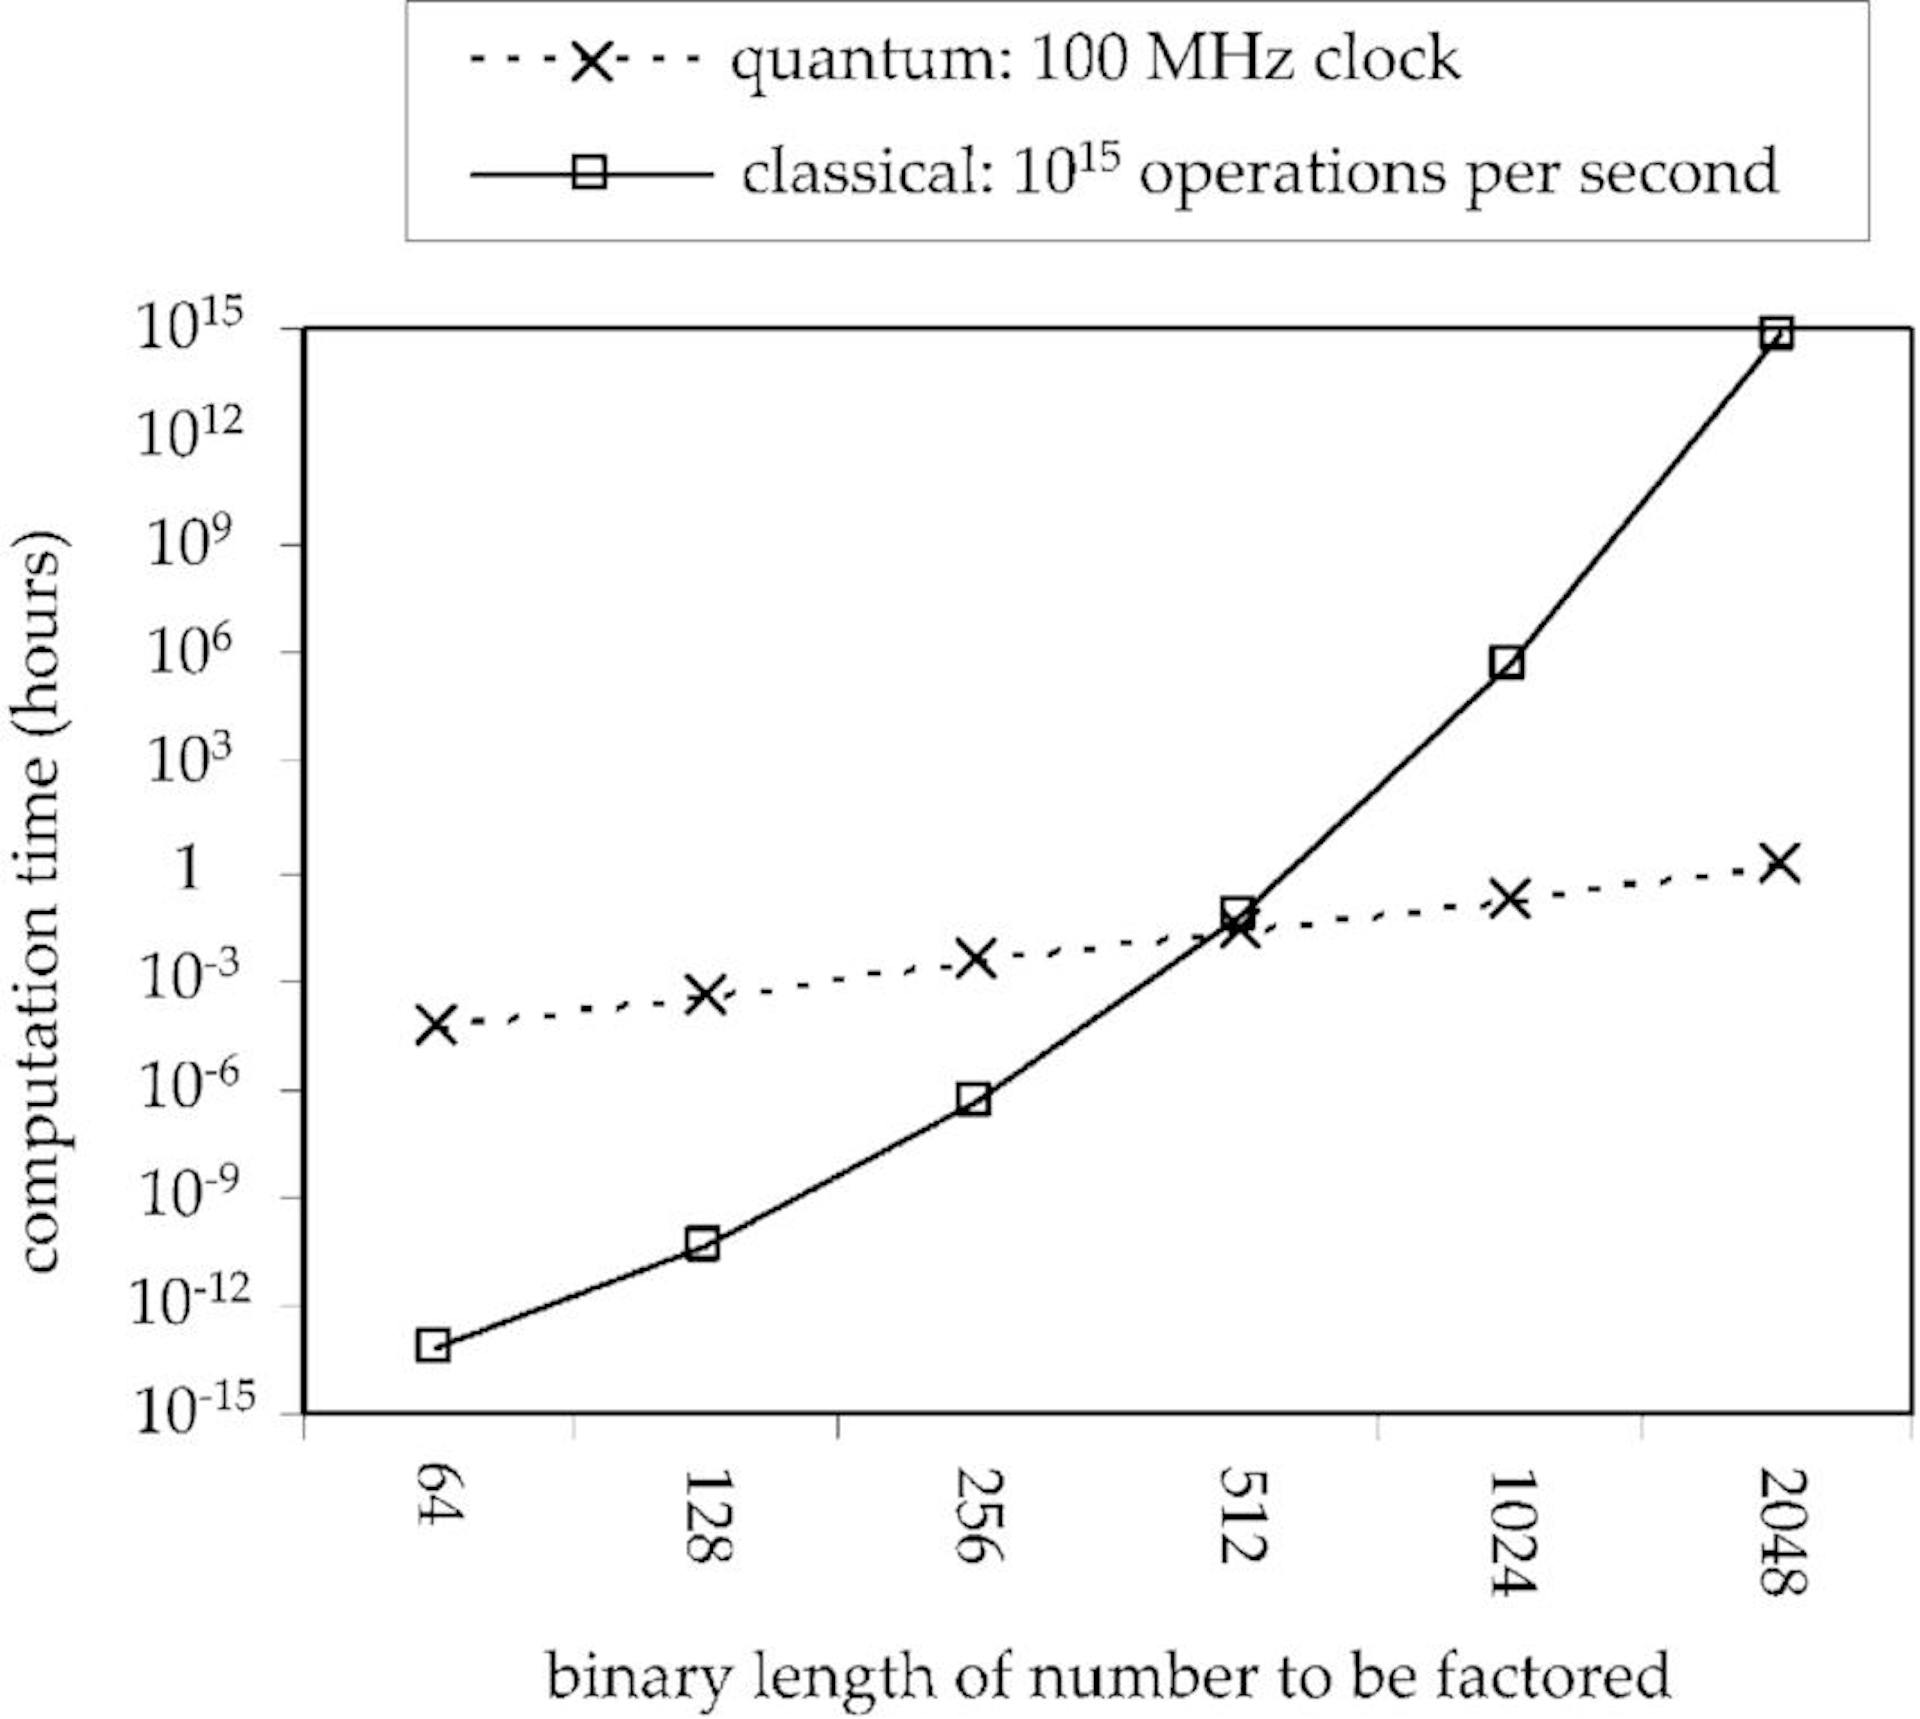 Источник — https://www.researchgate.net/figure/Comparison-of-estimated-computation-time-in-hours-for-the-problem-of-factoring-numbers-of_fig1_2986358.